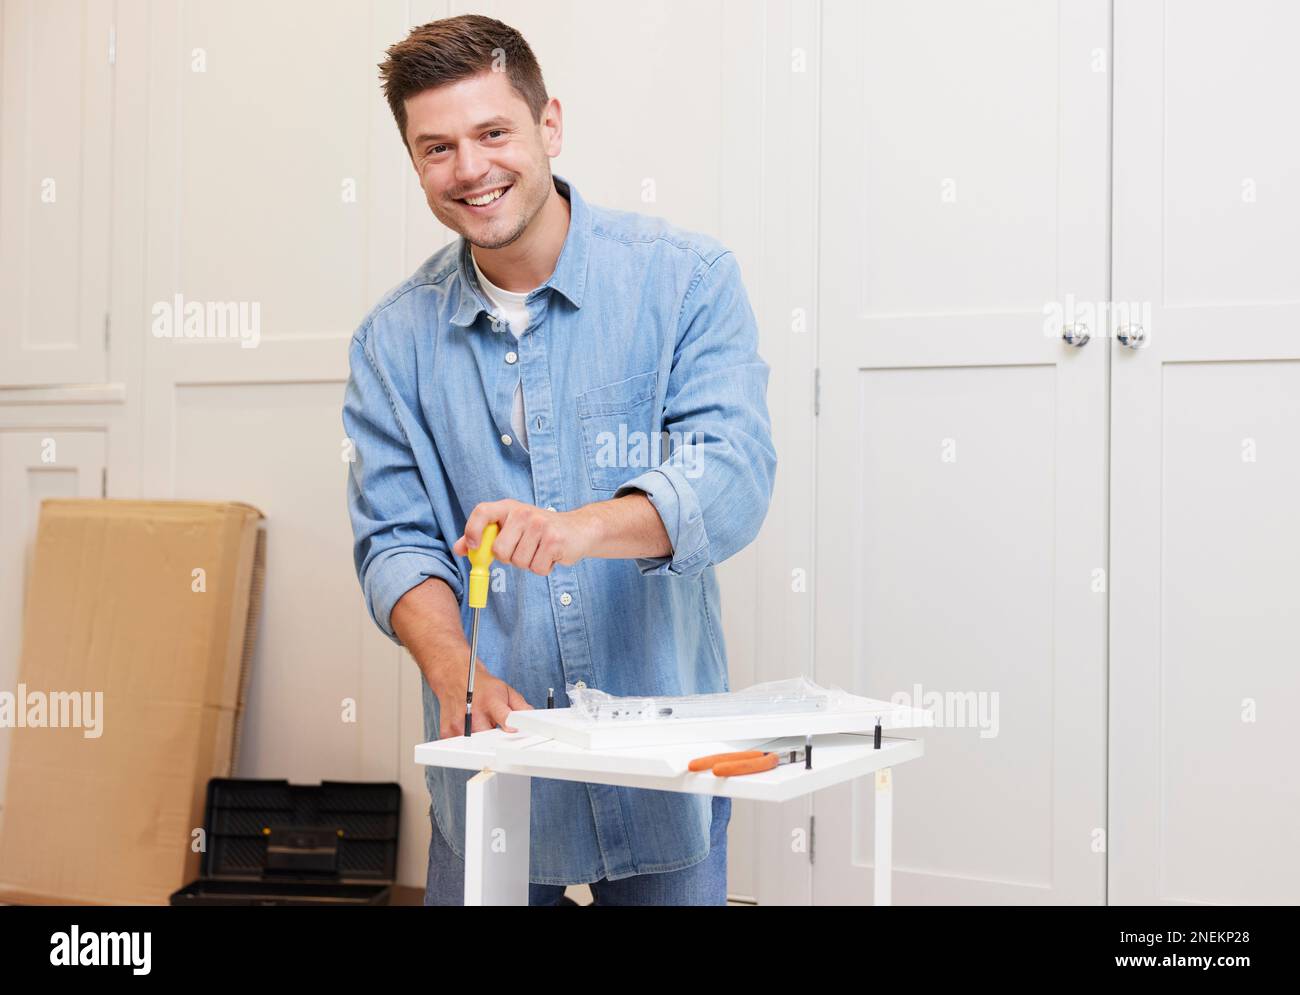 Portrait Of Man Putting Together Self Assembly Furniture At Home Stockfoto